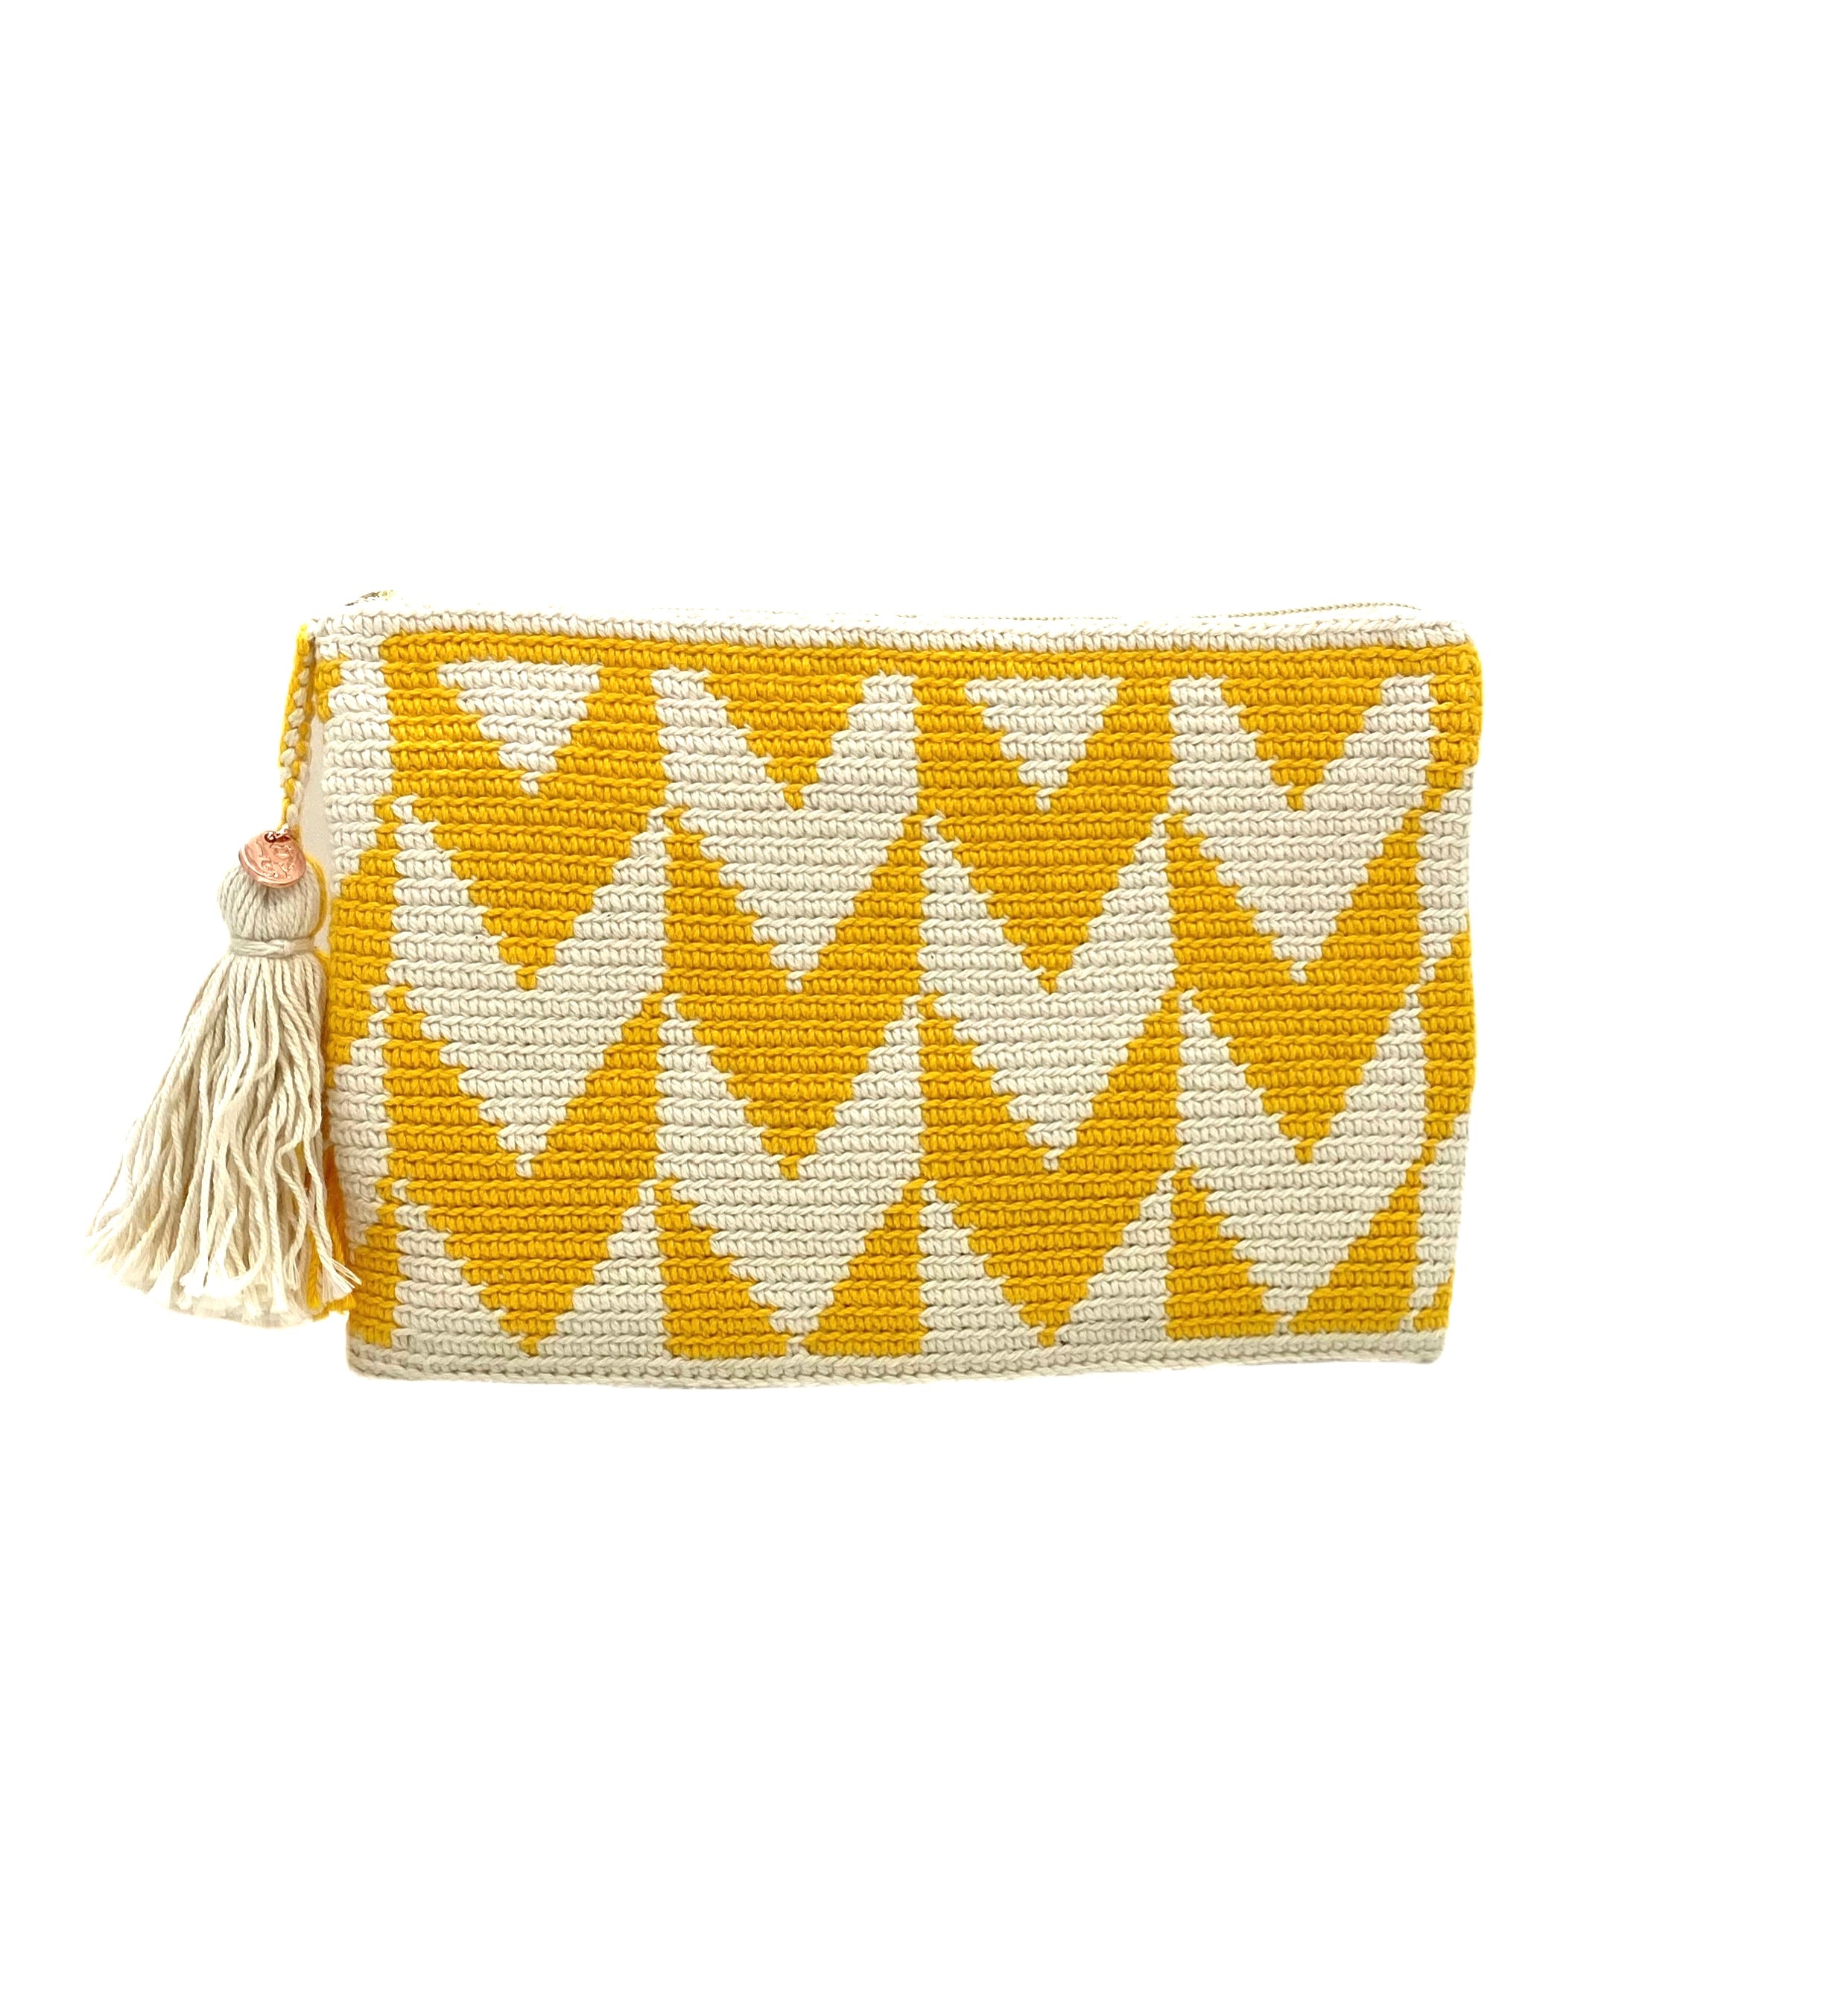 Clutch, beautiful V black and white pattern, with tassel.